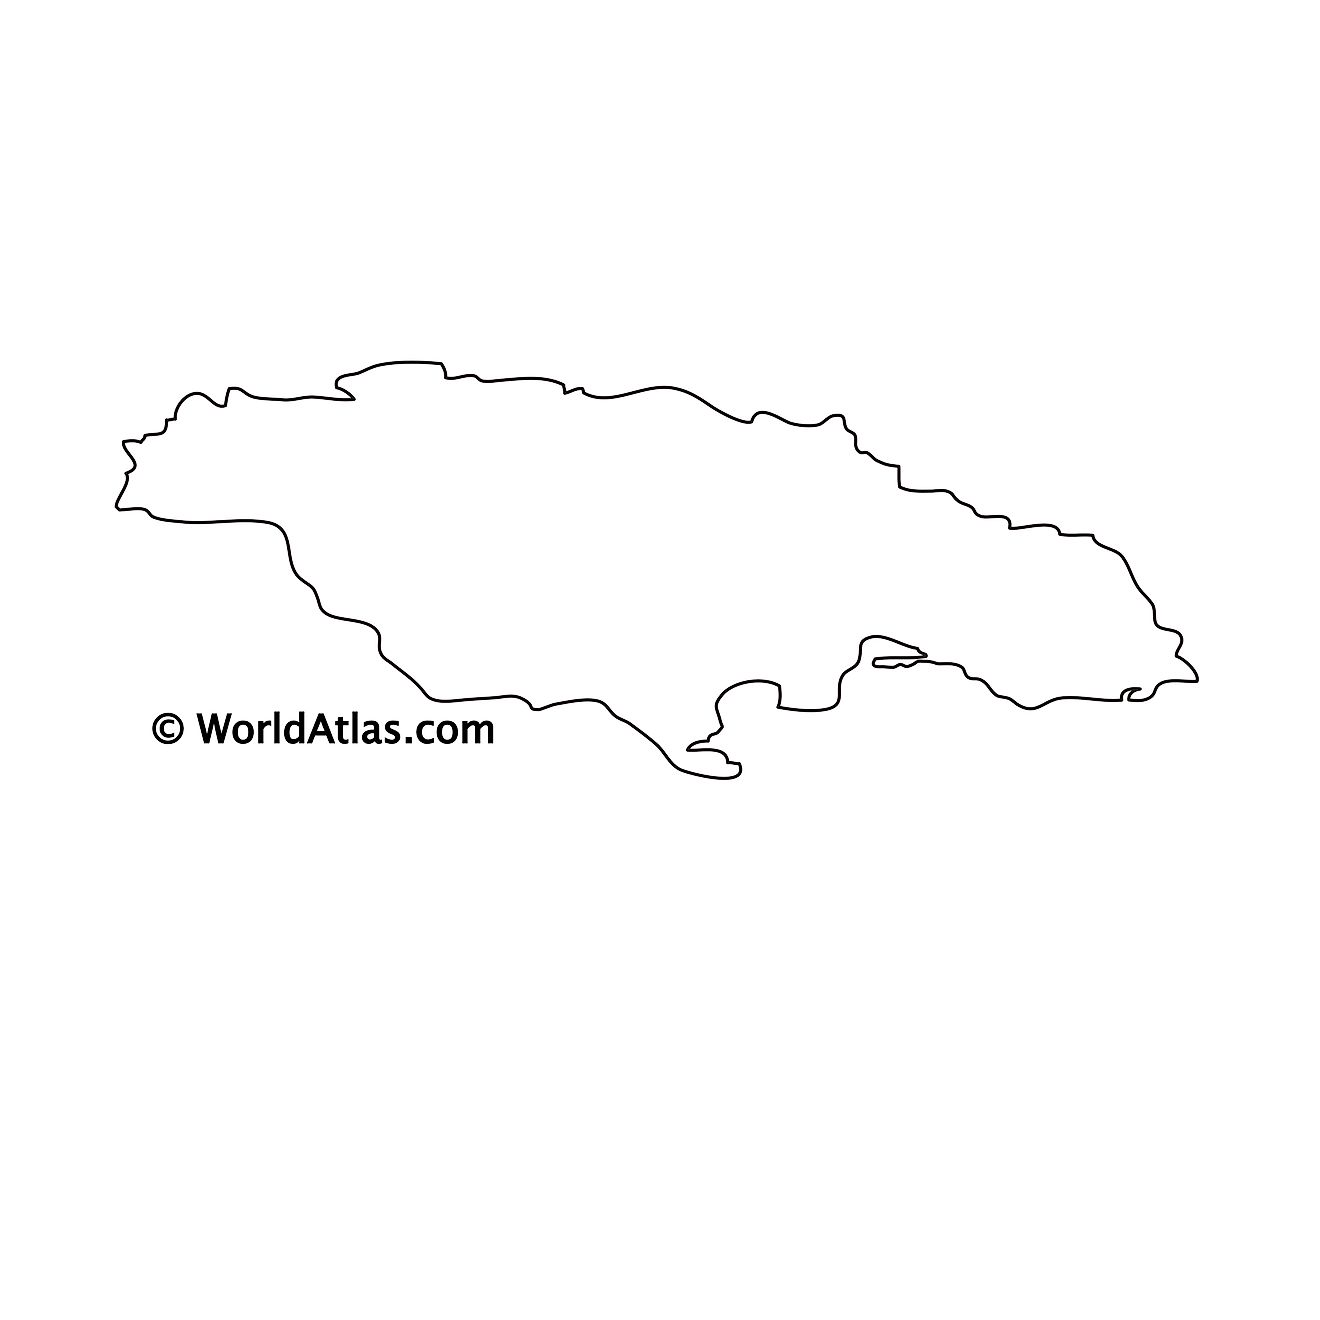 Blank outline map of Jamaica